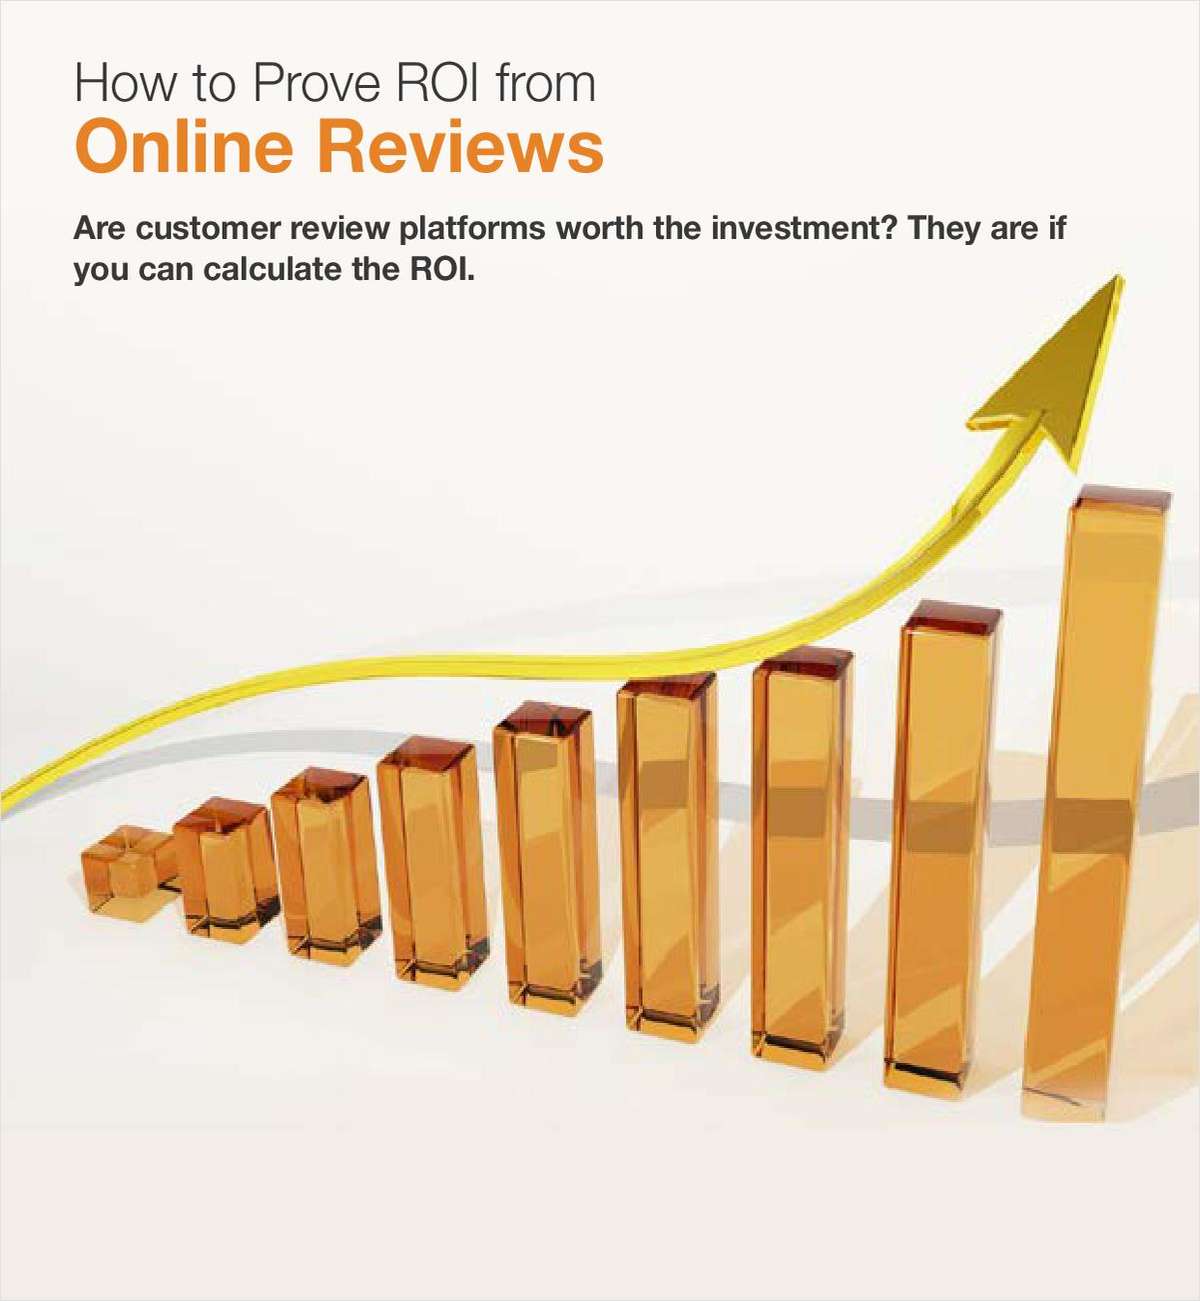 Best Practices to Prove ROI from Online Reviews